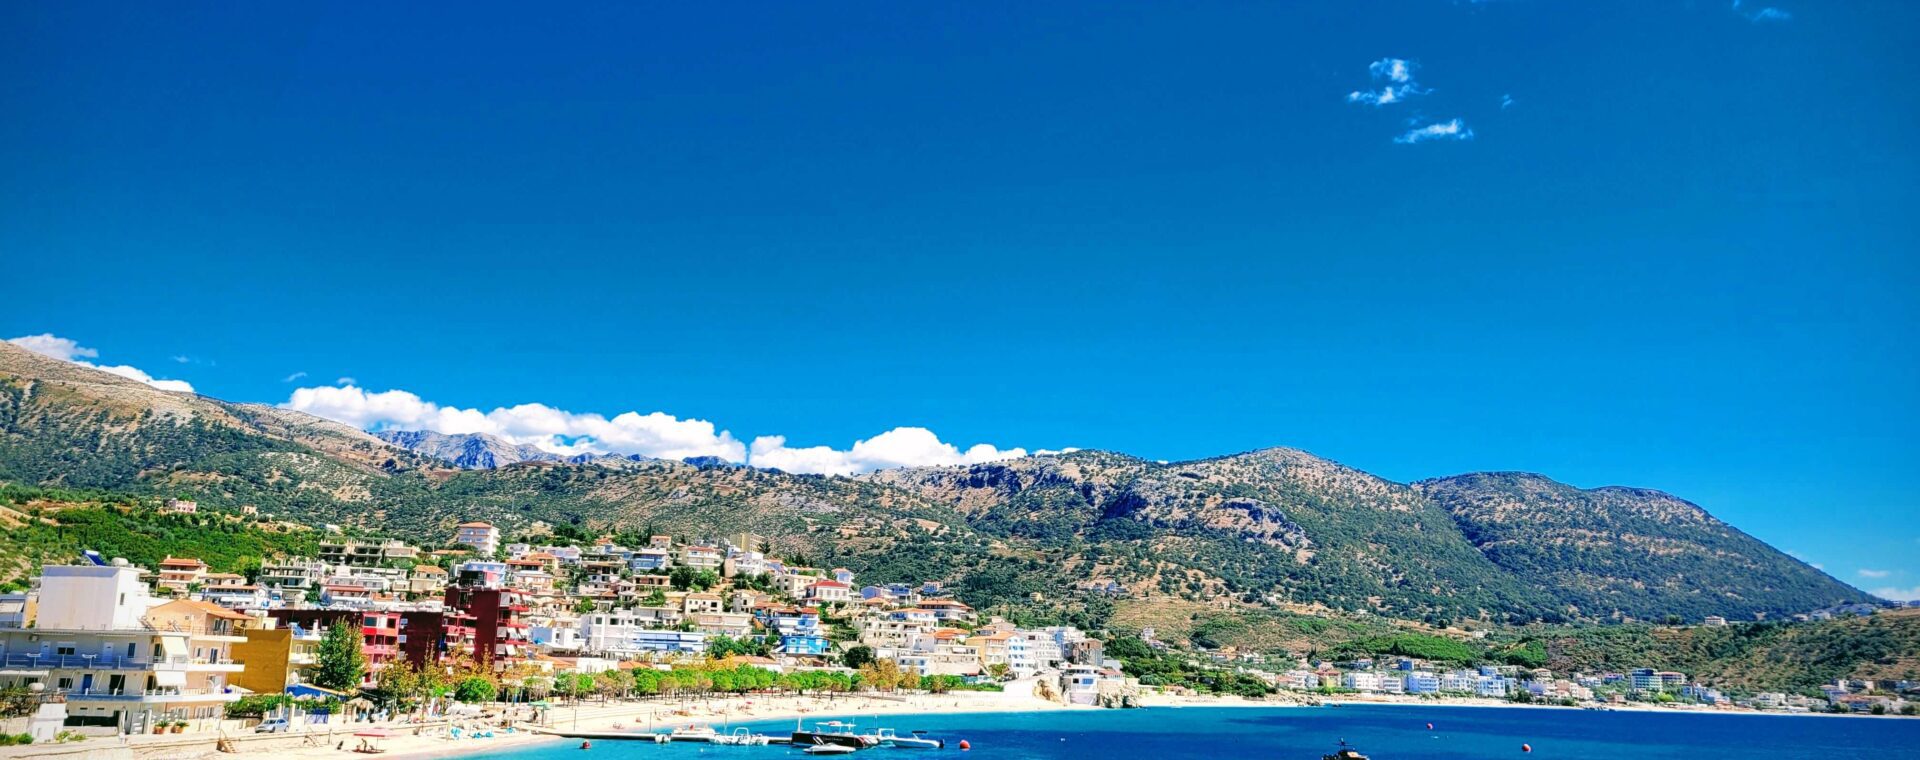 Travel Guide to Himare, Albania